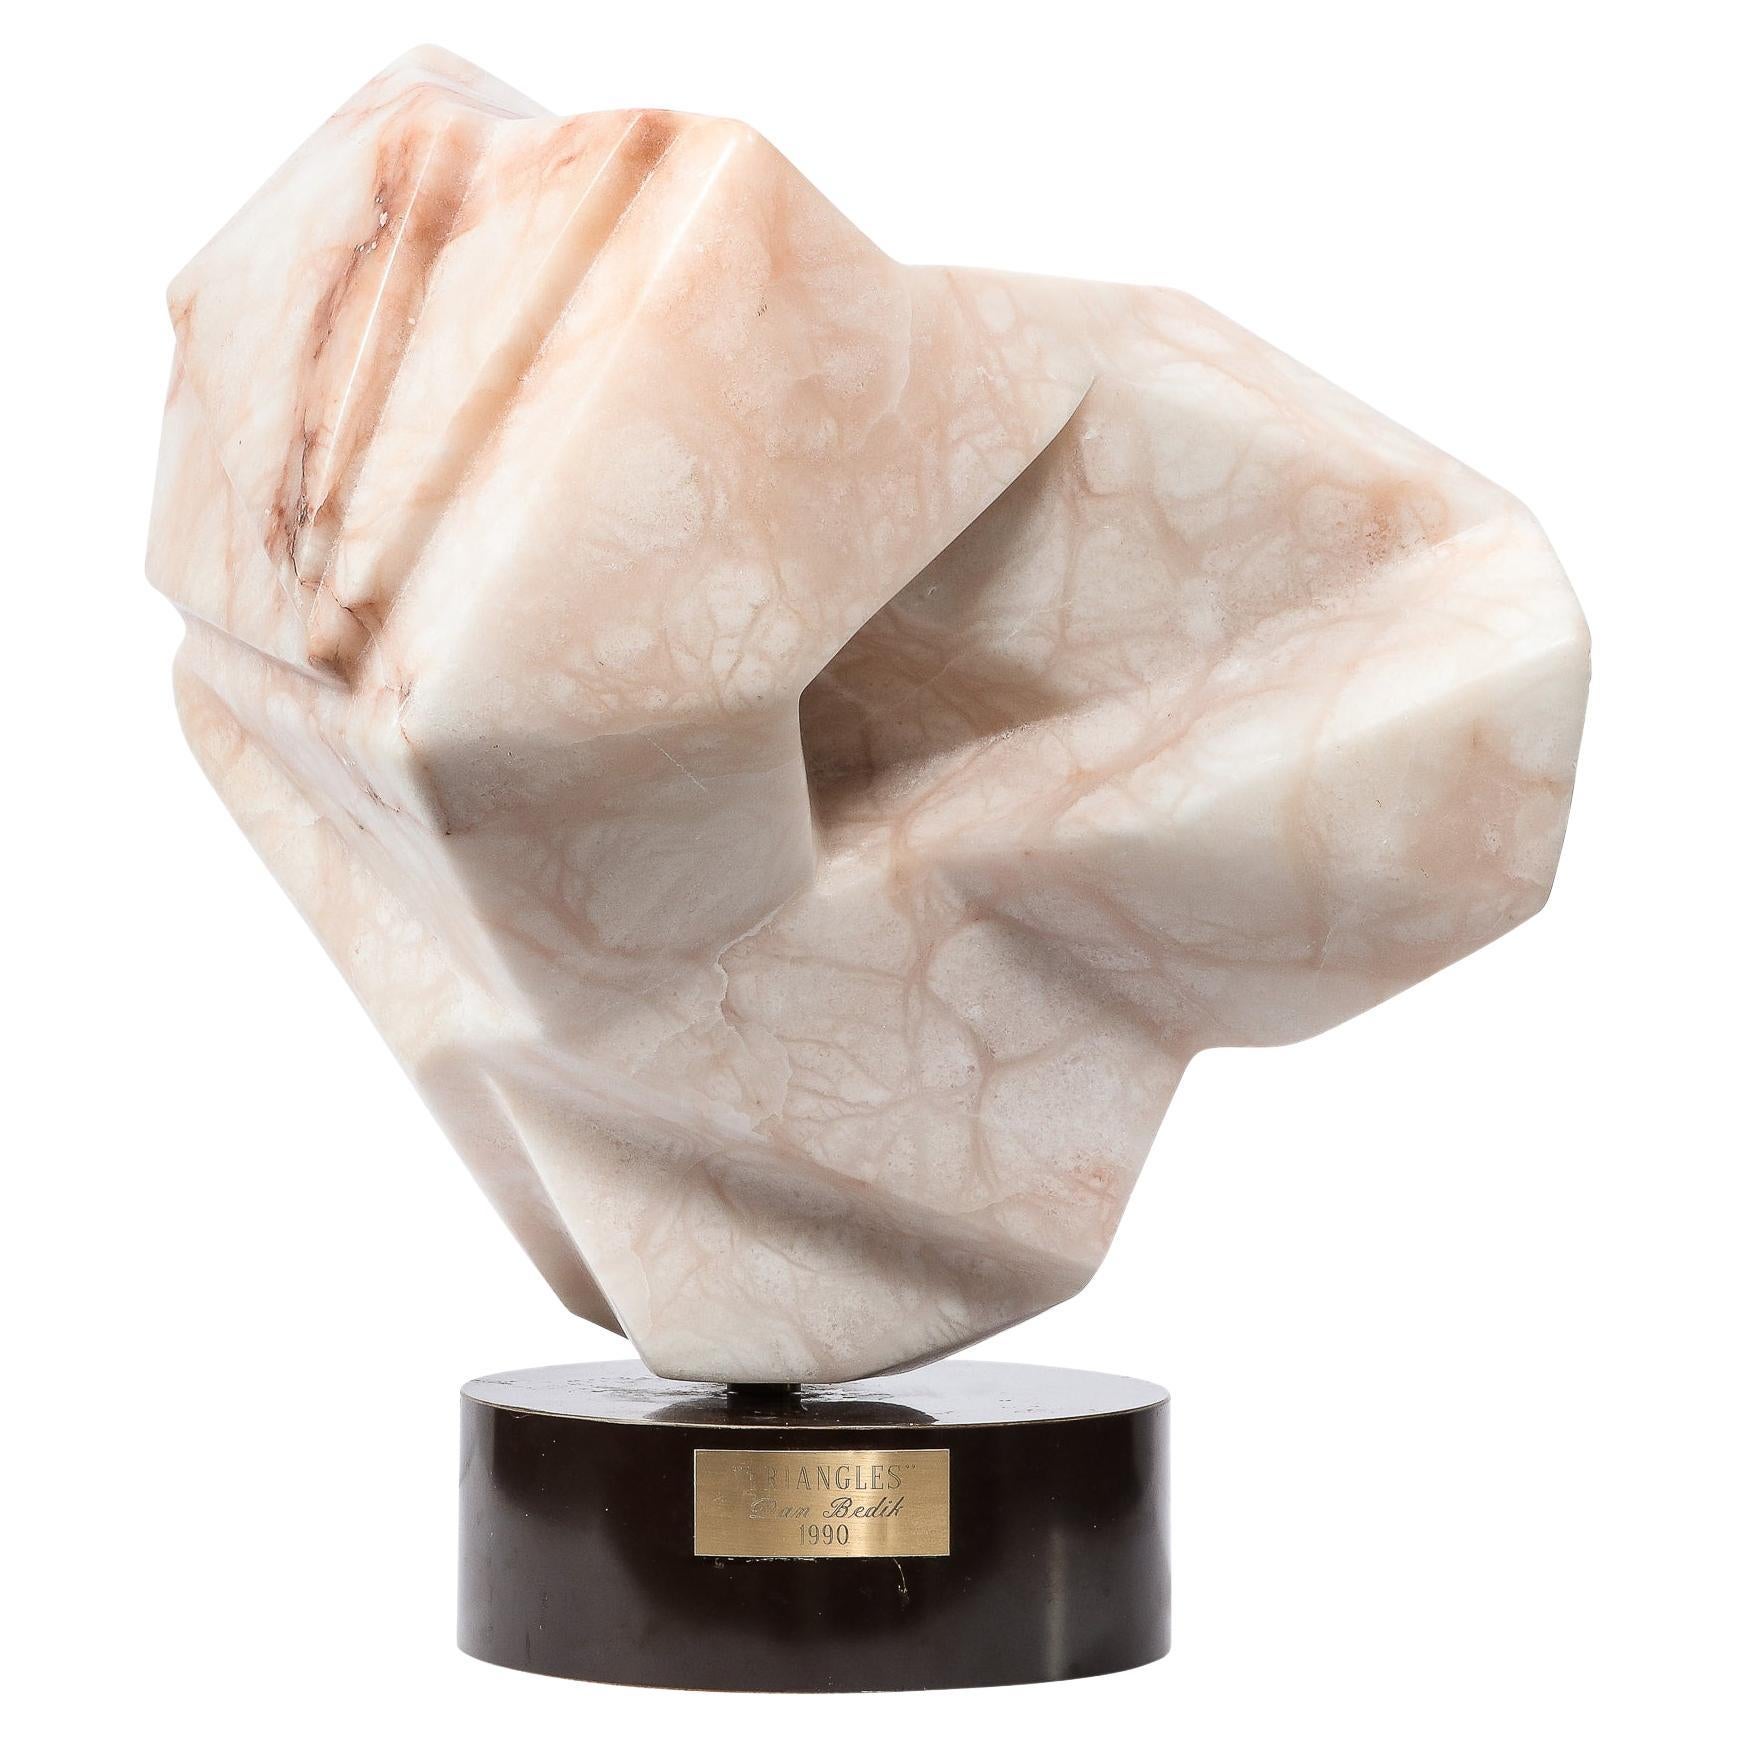 Modernist Abstract Geometric Exotic Marble Sculpture, "Triangles", by Dan Bedik 